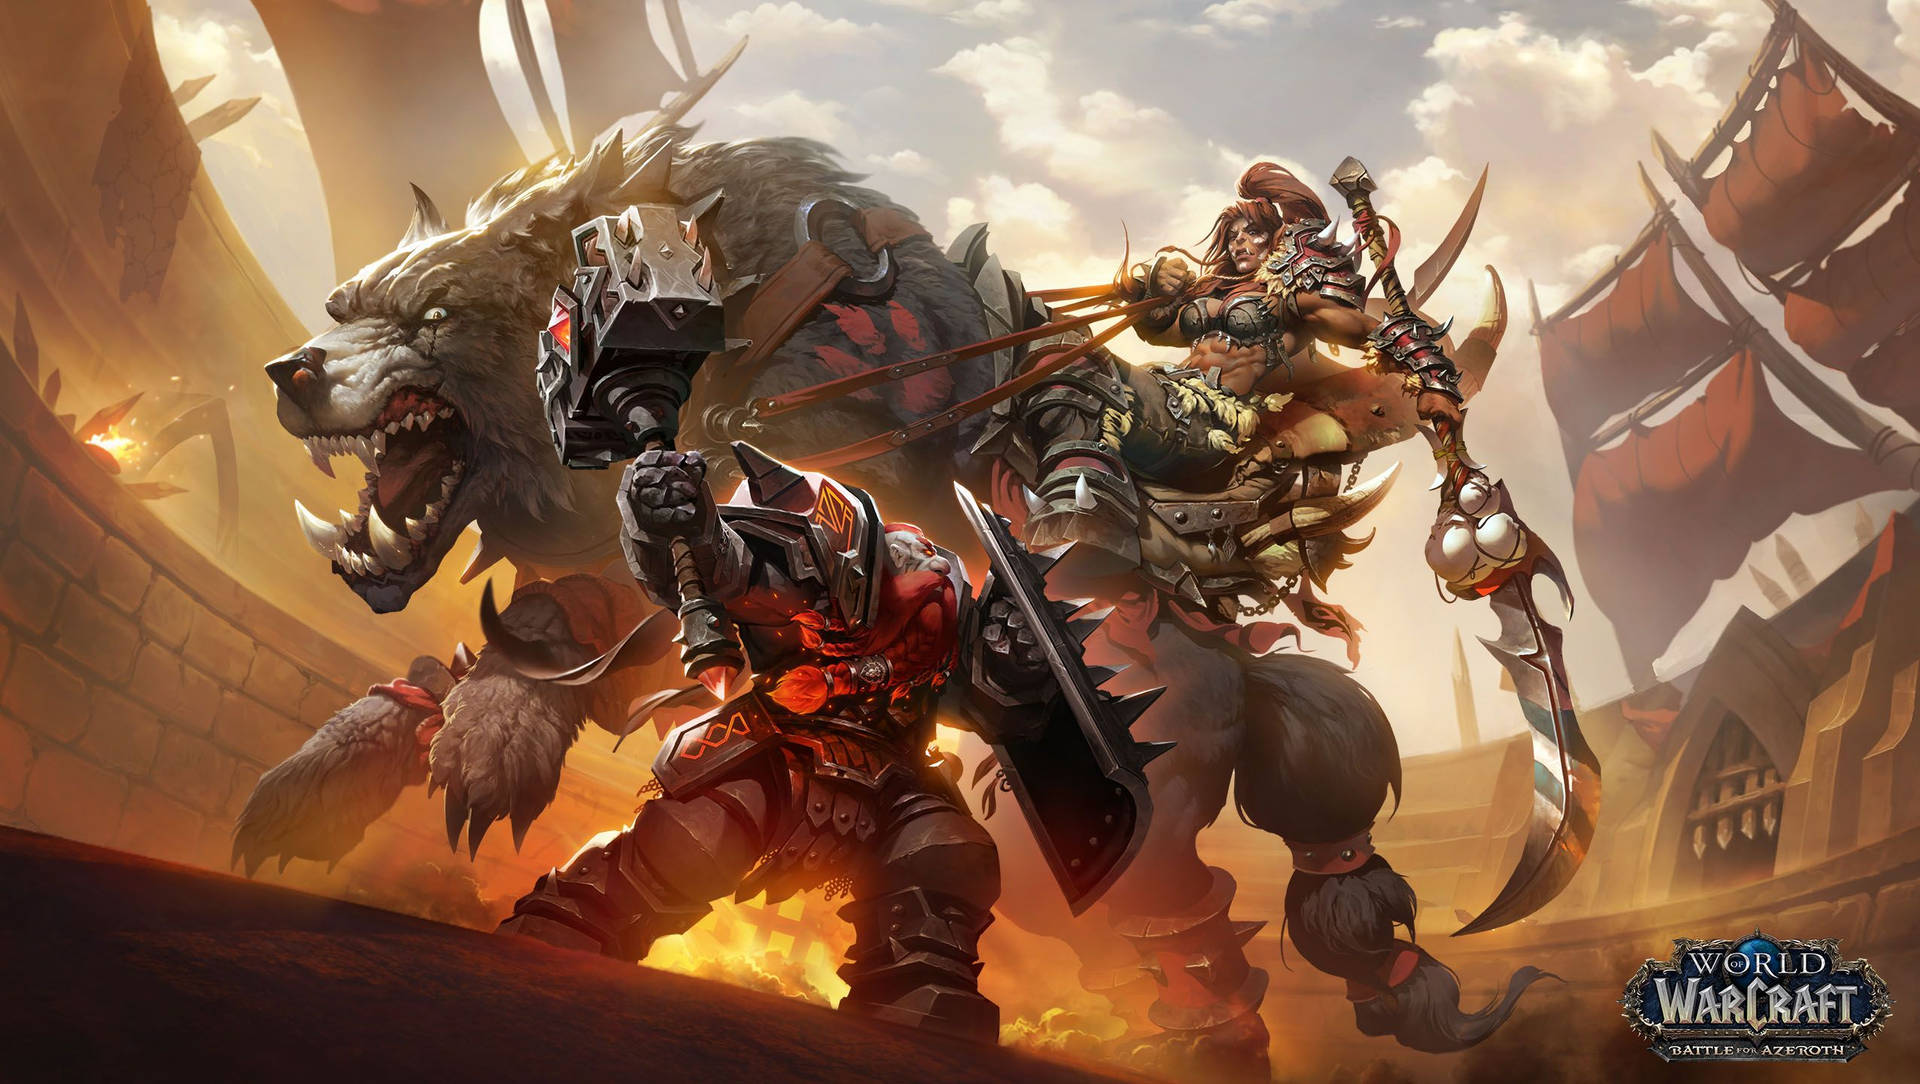 A Warrior and Mage Engaged in a Fierce Battle in World Of Warcraft: Battle For Azeroth Wallpaper